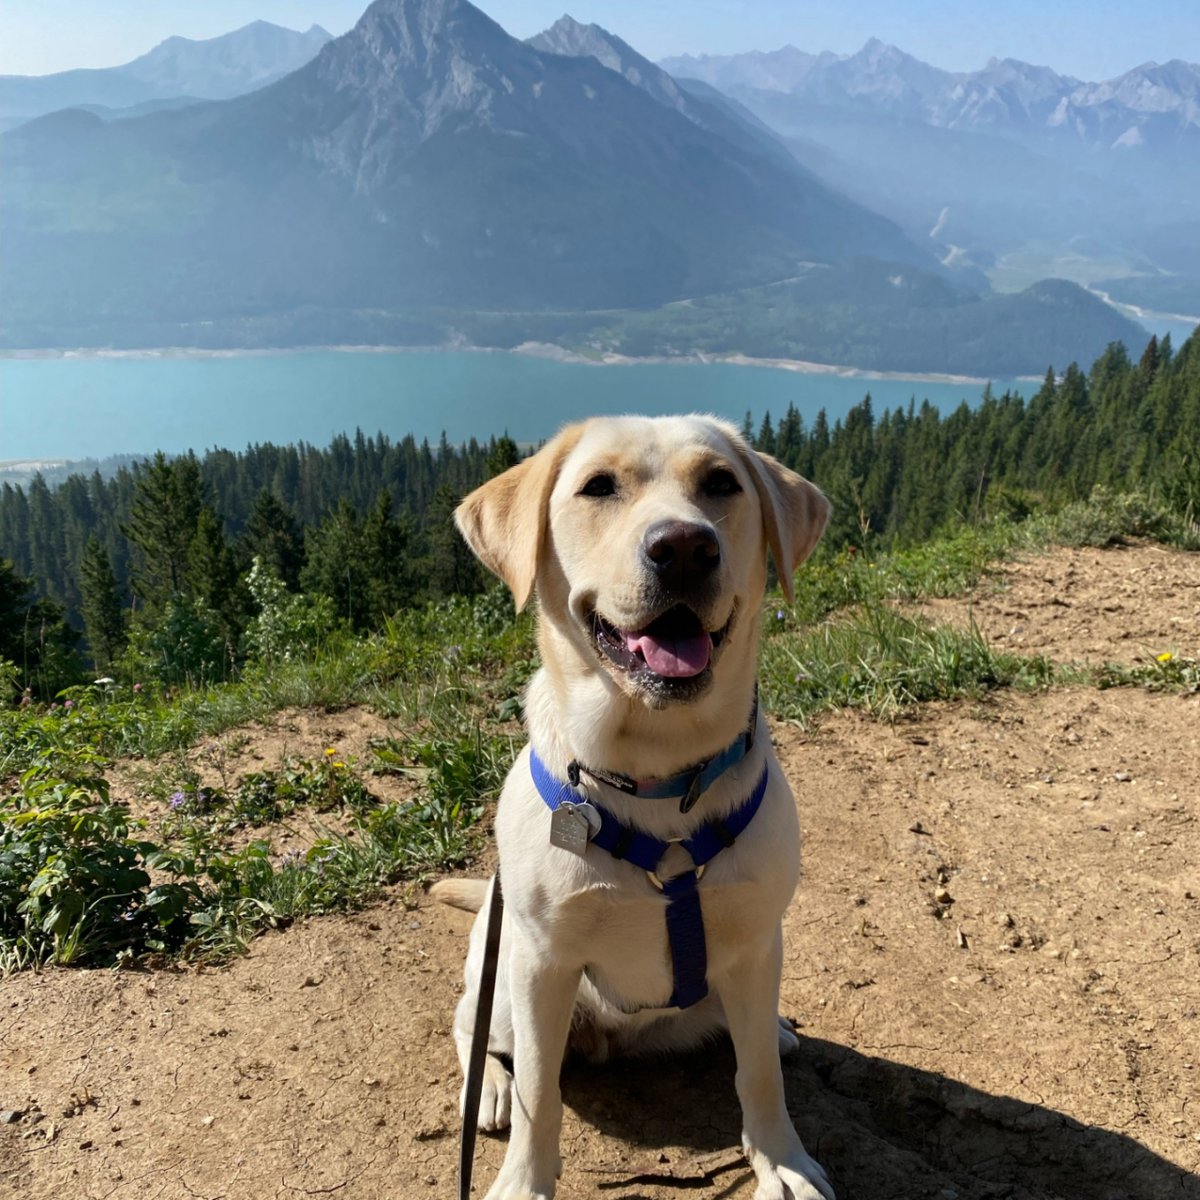 It's Sunday! Time to enjoy the beautiful natural world all around us! We love going on hikes with our pups, once they are old enough. It's a great way to get some exercise, have some fun,  and bond with our dogs.  PADS Sounder recommends finding a trail with an paw-some view!